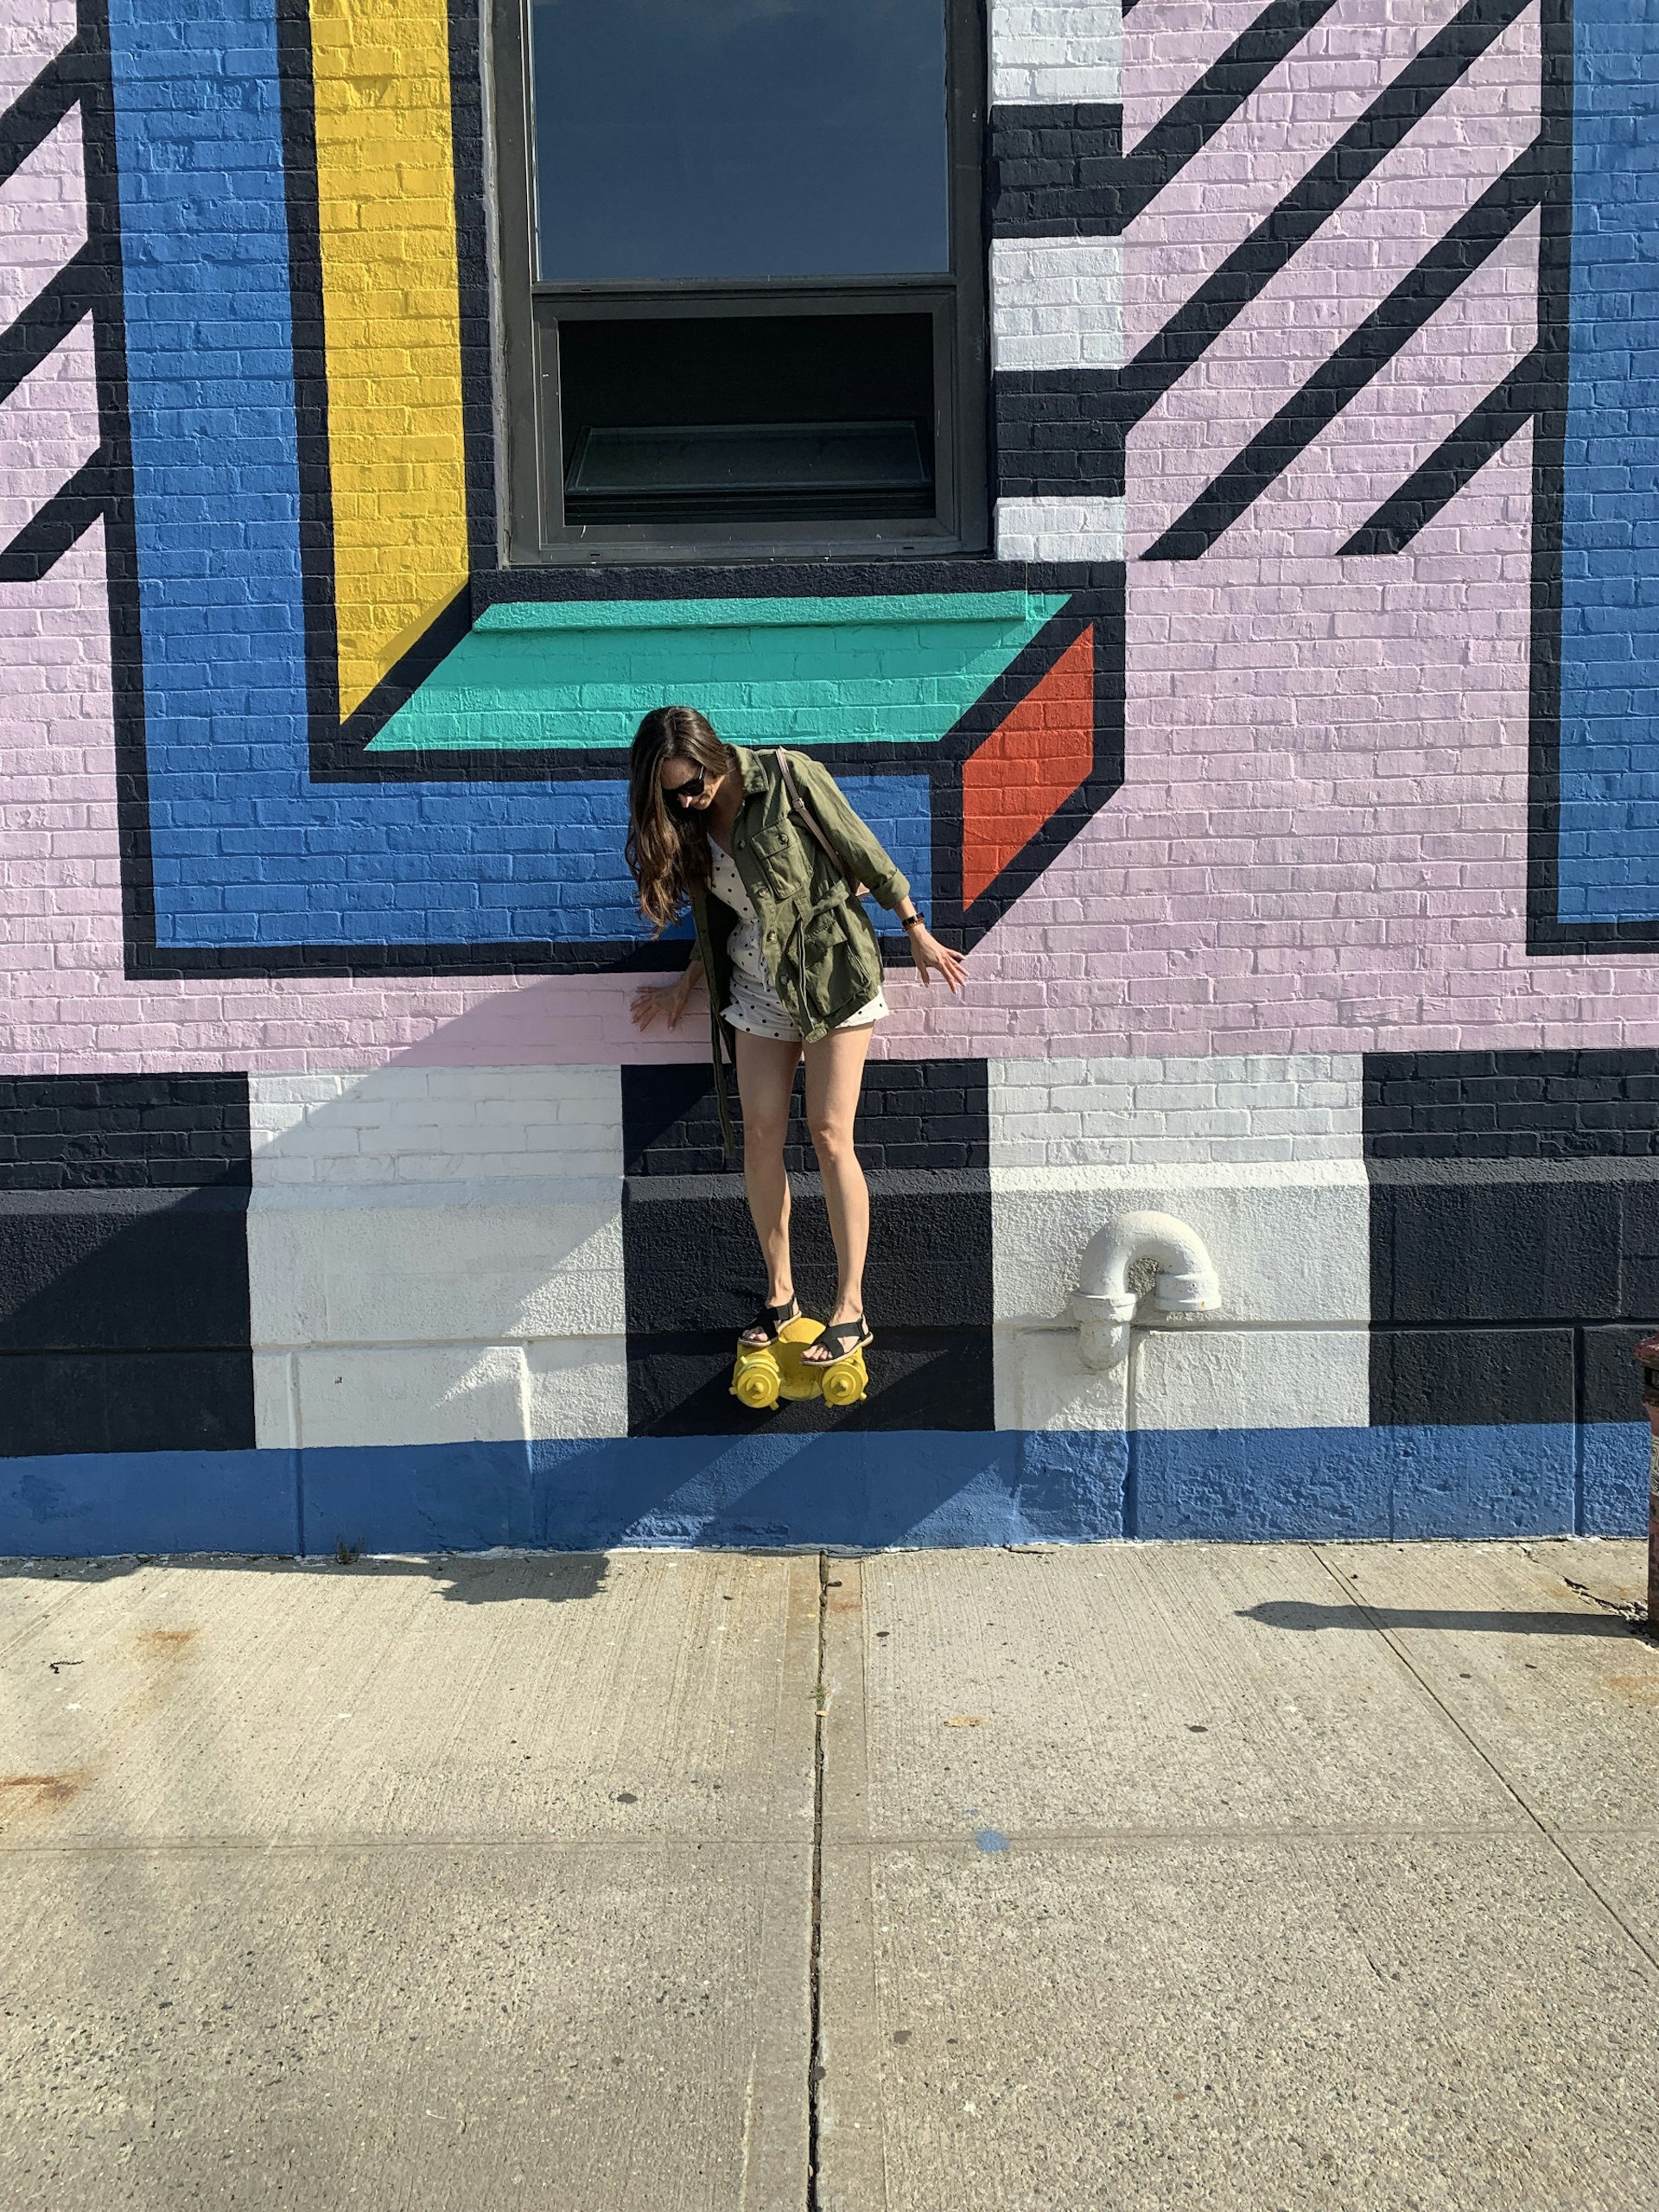 The writer balances on a yellow fire hydrant in front of a colourful wall mural.